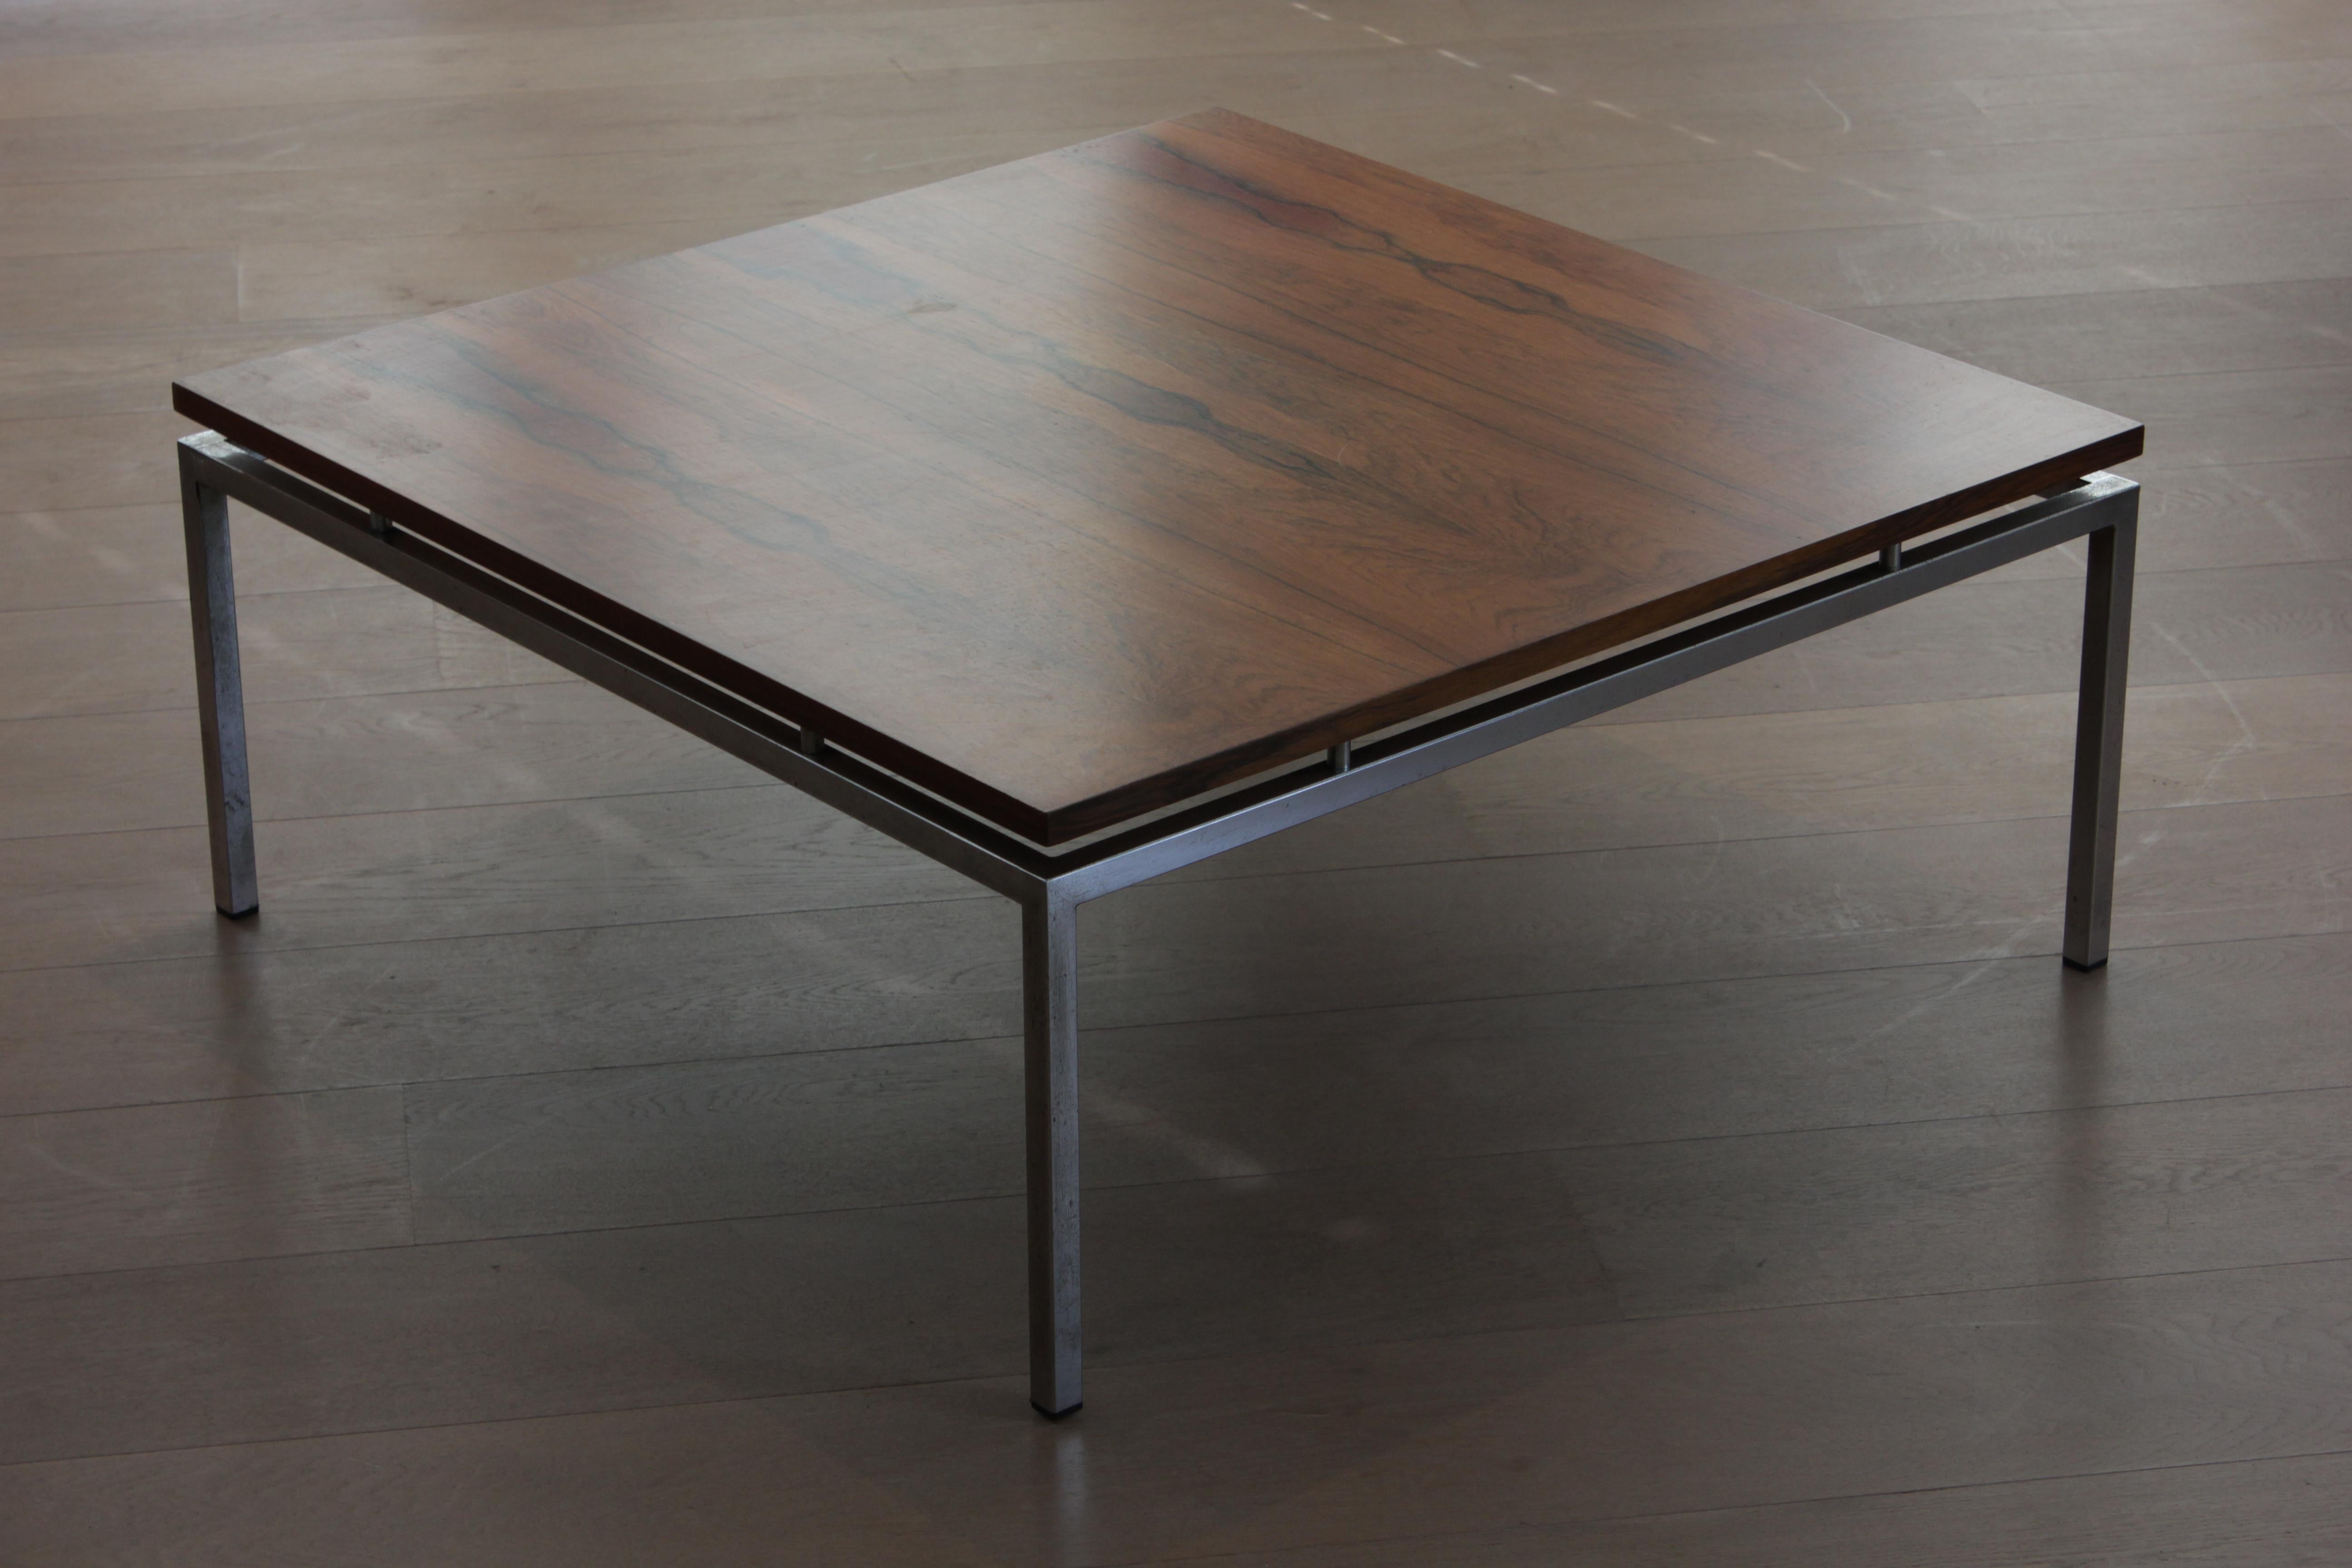 Coffee table by Knud Joos-Jensen for Jason Møbler

1960s

Denmark

Rosewood and steel

34cm high, 80cm wide, 80cm deep

Knud Joos-Jensen (1928-2008) distinguished himself as a visionary Danish architect and designer. Renowned for his sleek and